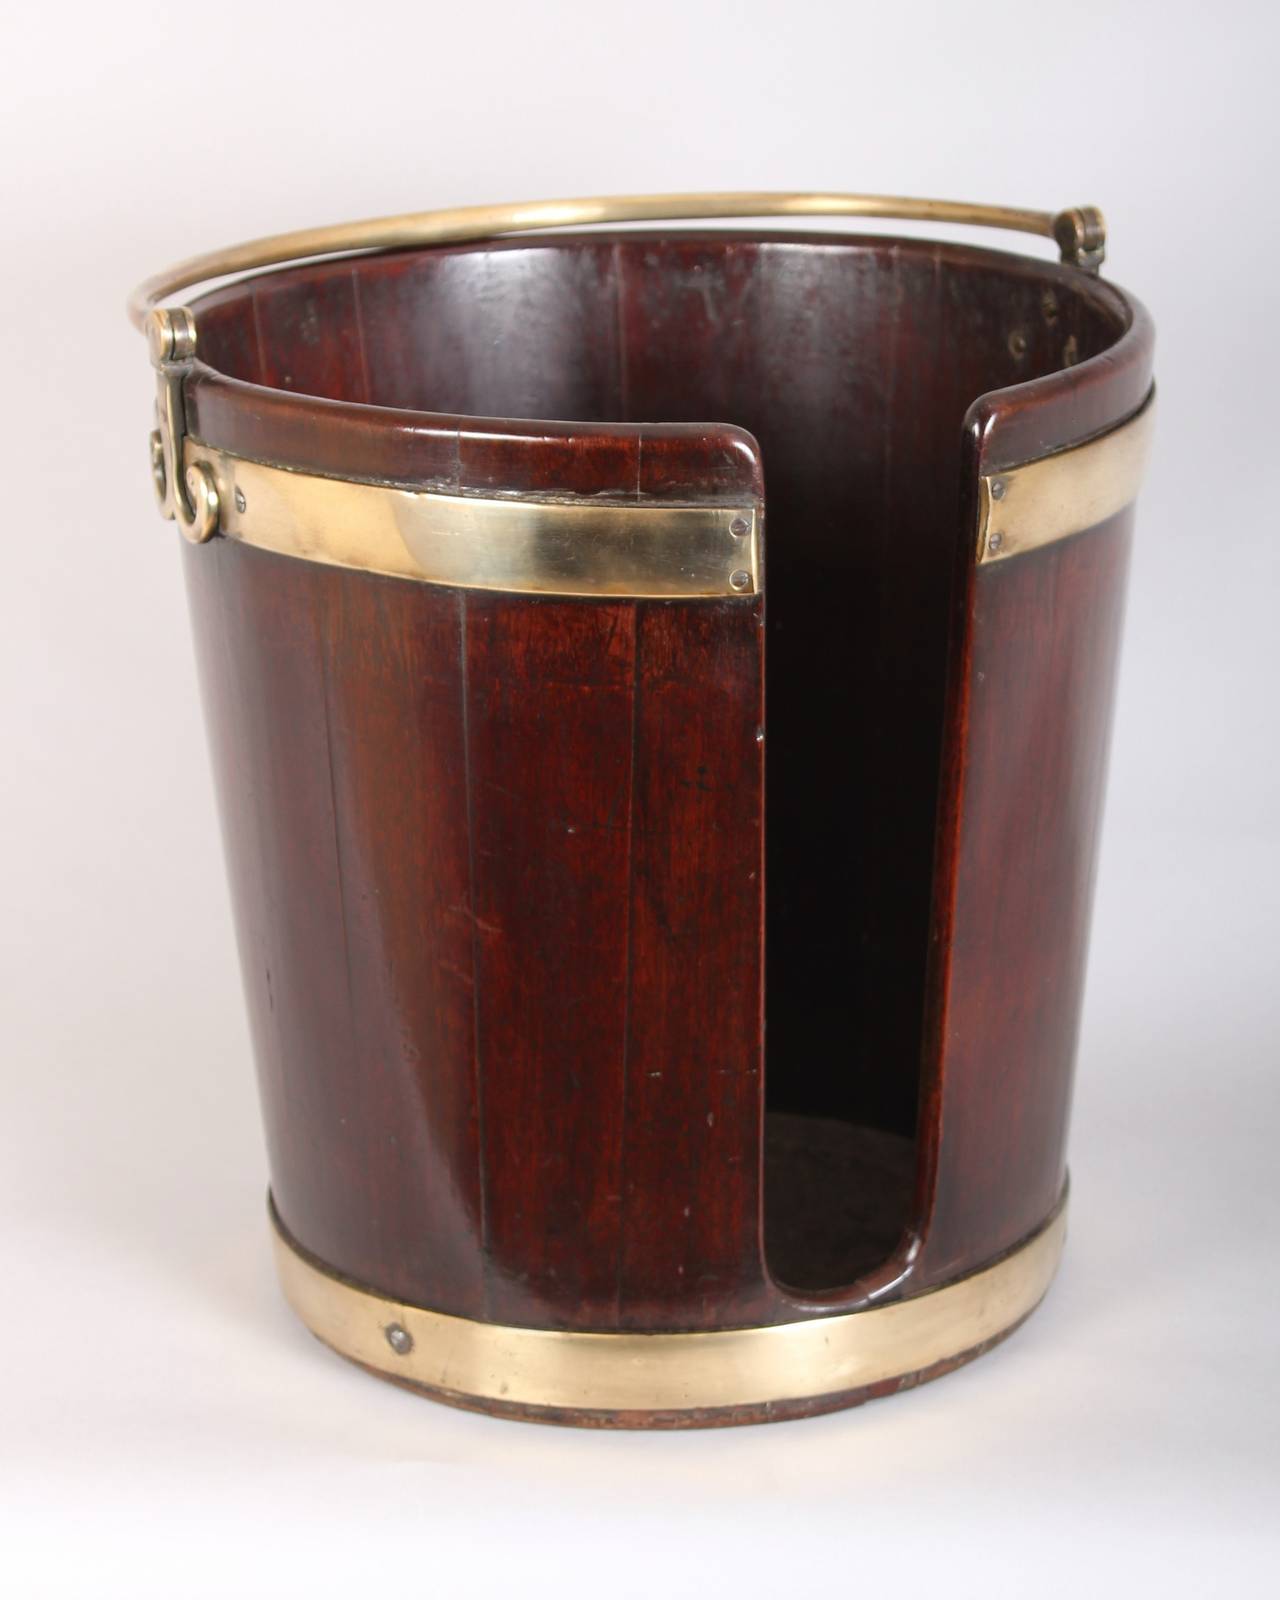 George III period mahogany plate-bucket of coopered construction with two brass bands and a swing-handle.